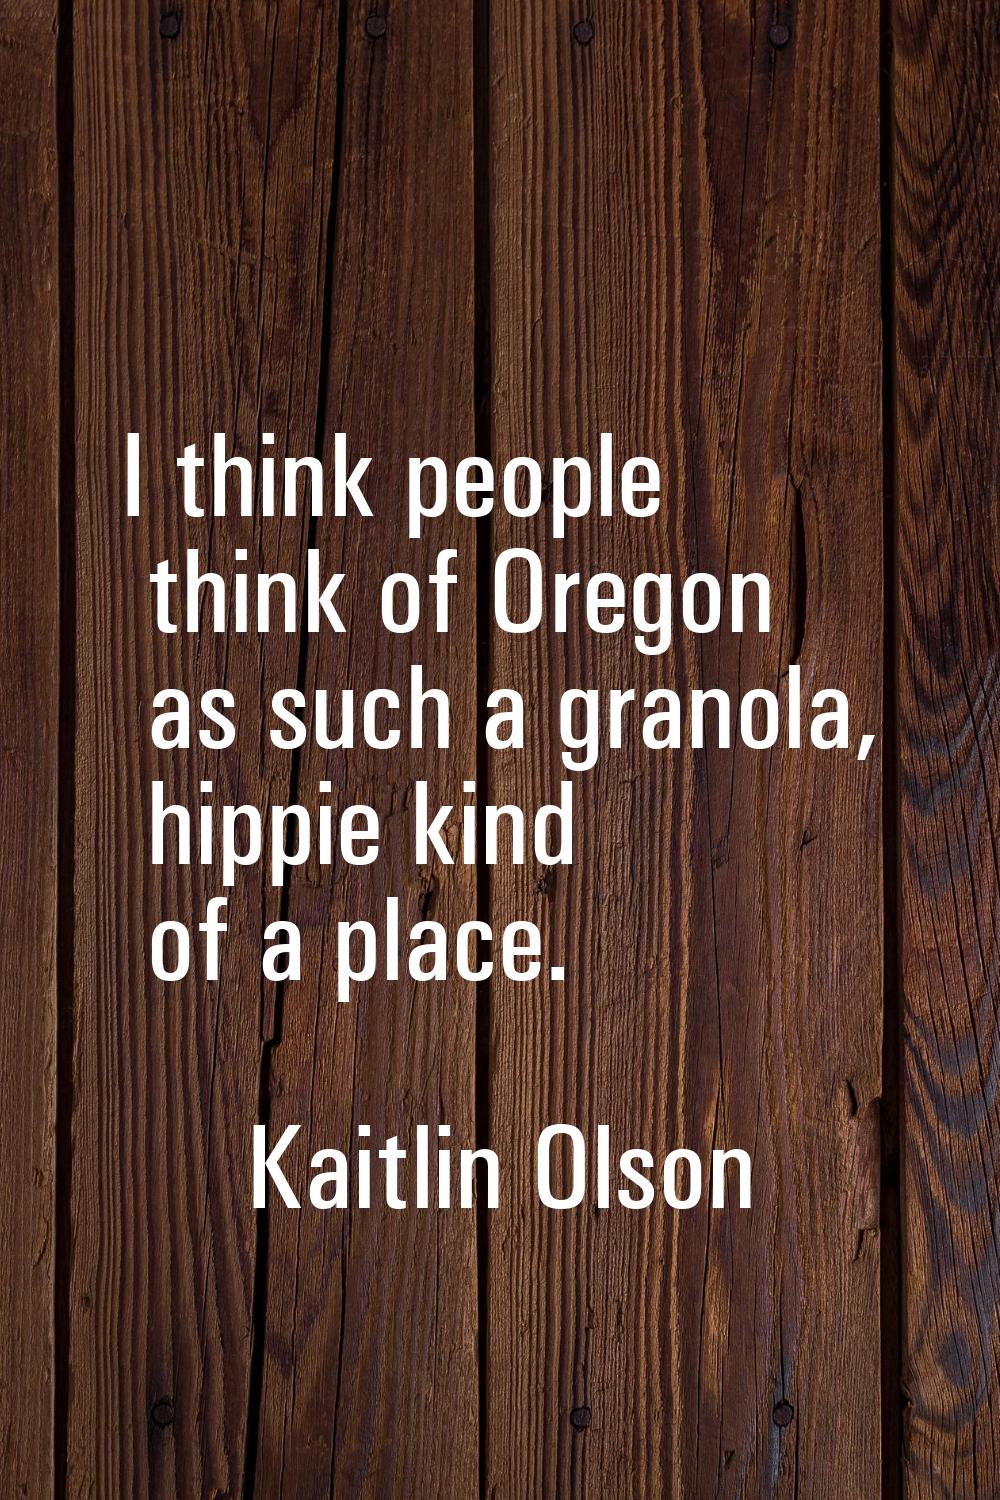 I think people think of Oregon as such a granola, hippie kind of a place.